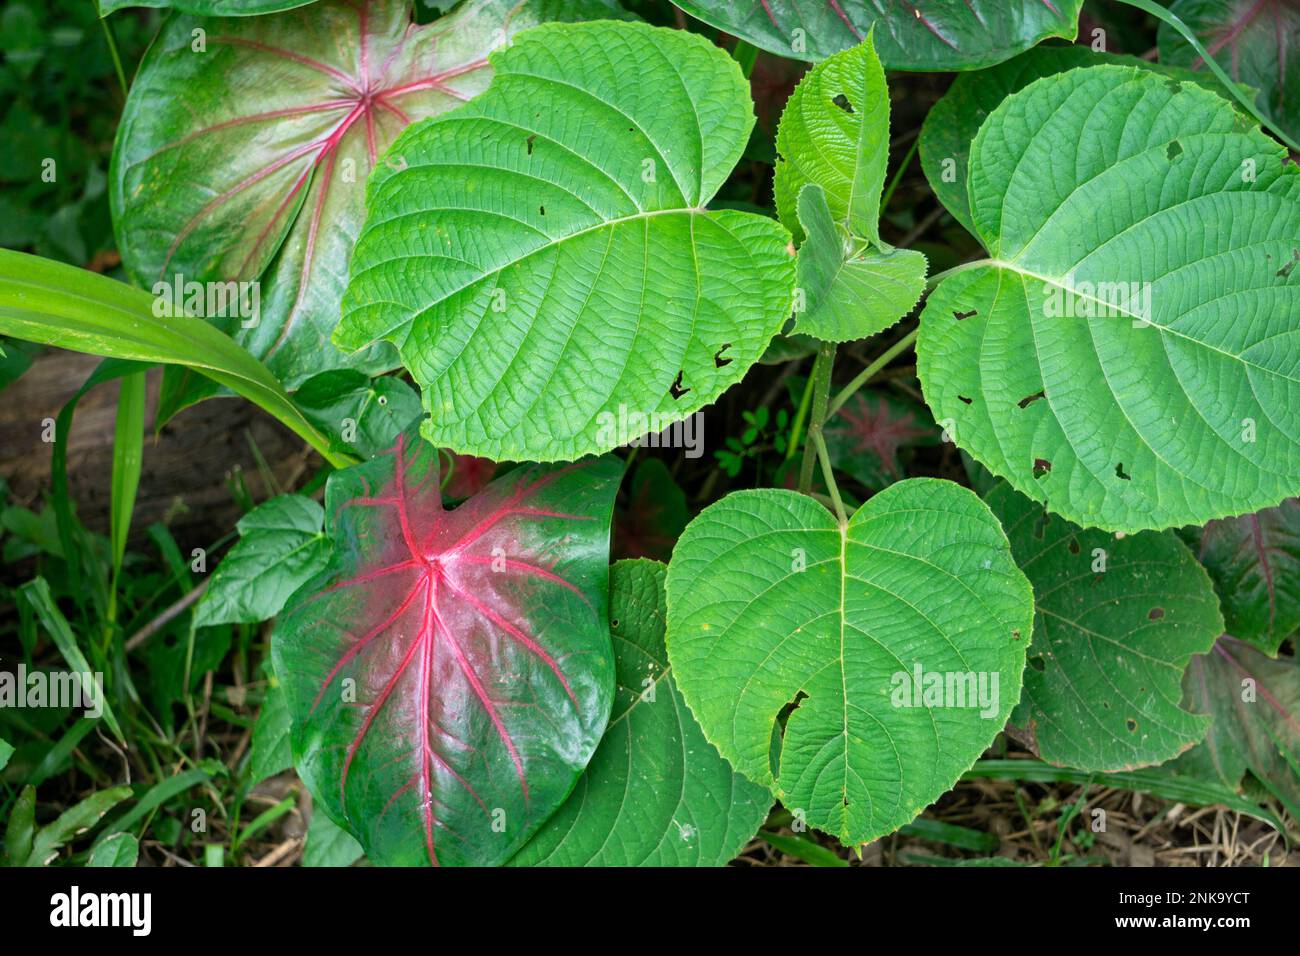 Red foliage with green veins Caladium fancy leaved tropical foliage plant leaves popular houseplant isolated on white background, clipping path includ Stock Photo